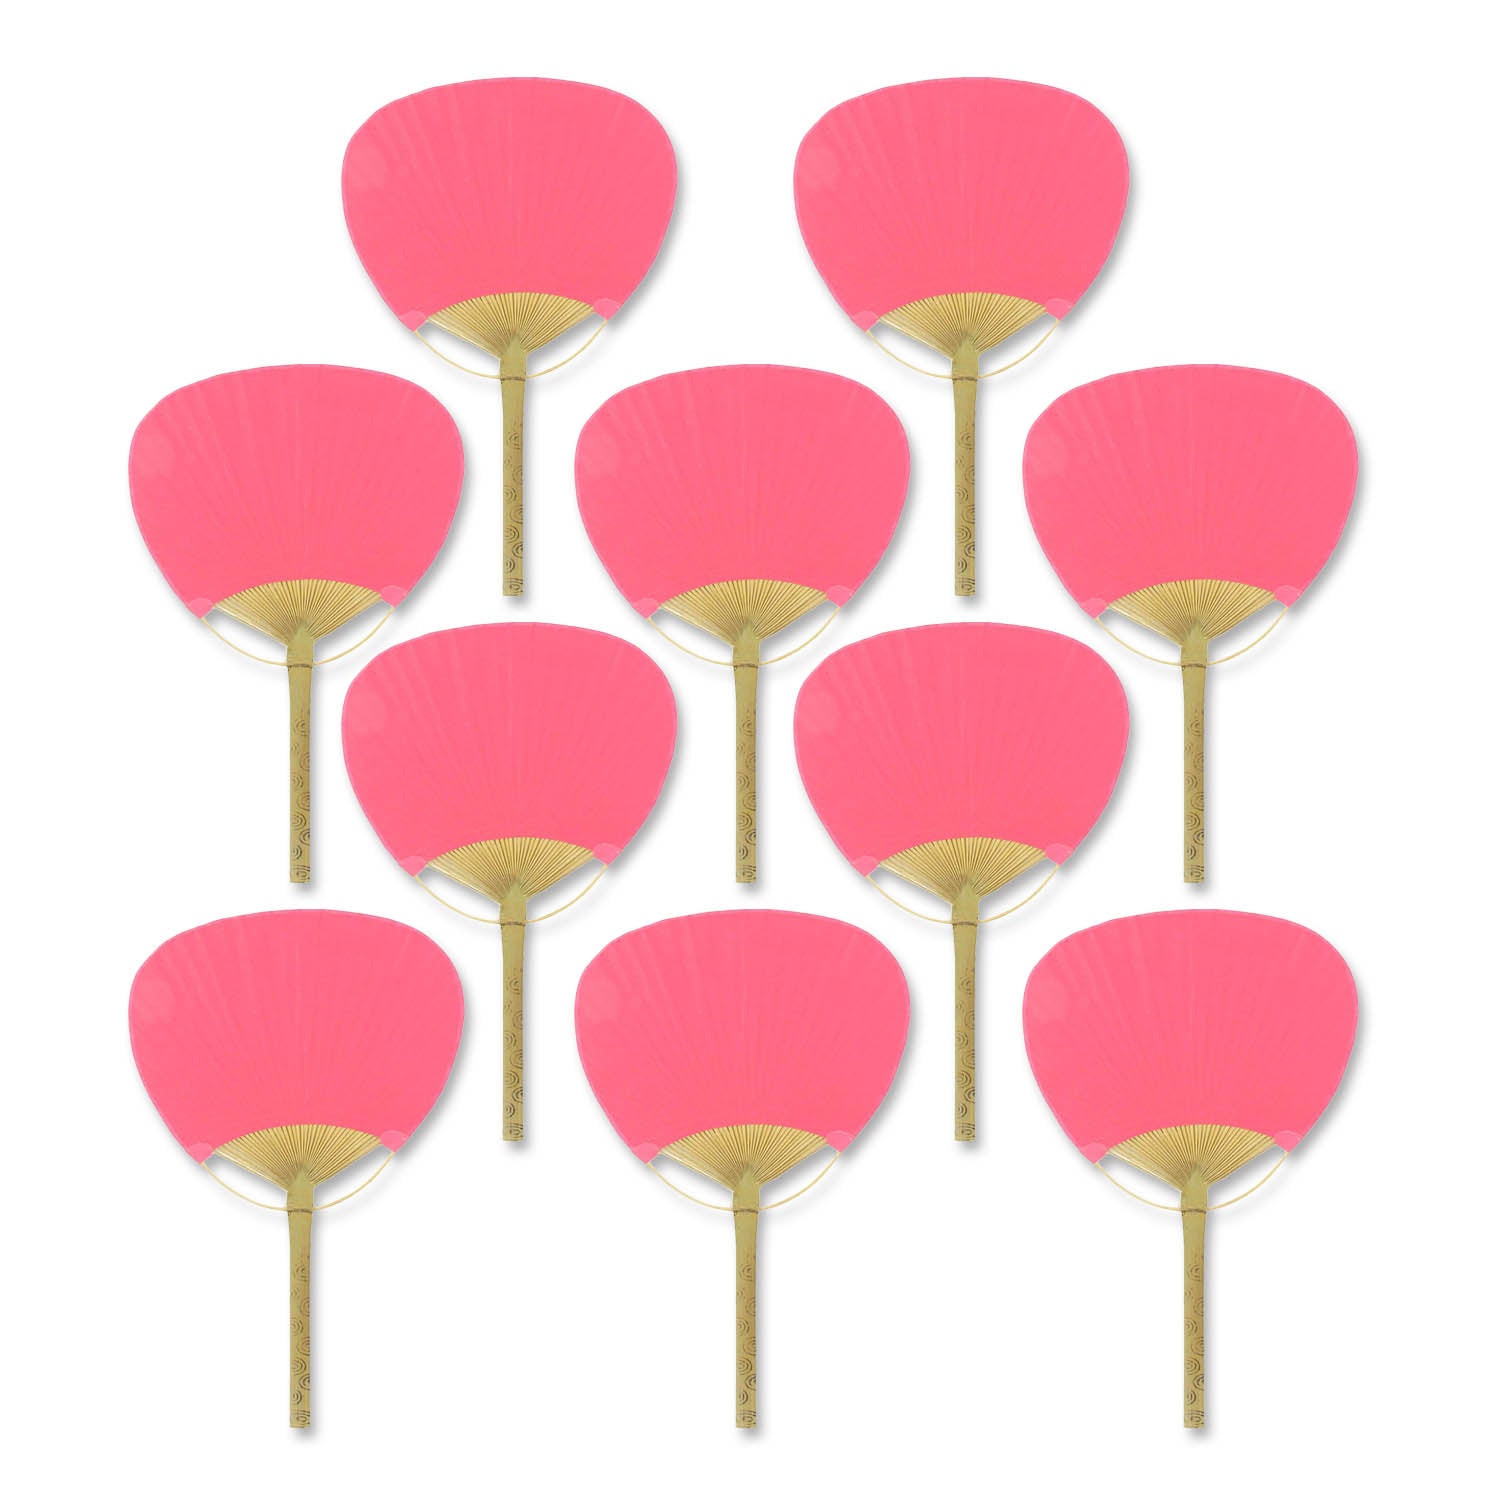 9" Fuchsia / Hot Pink Paddle Paper Hand Fans for Weddings (10 Pack)